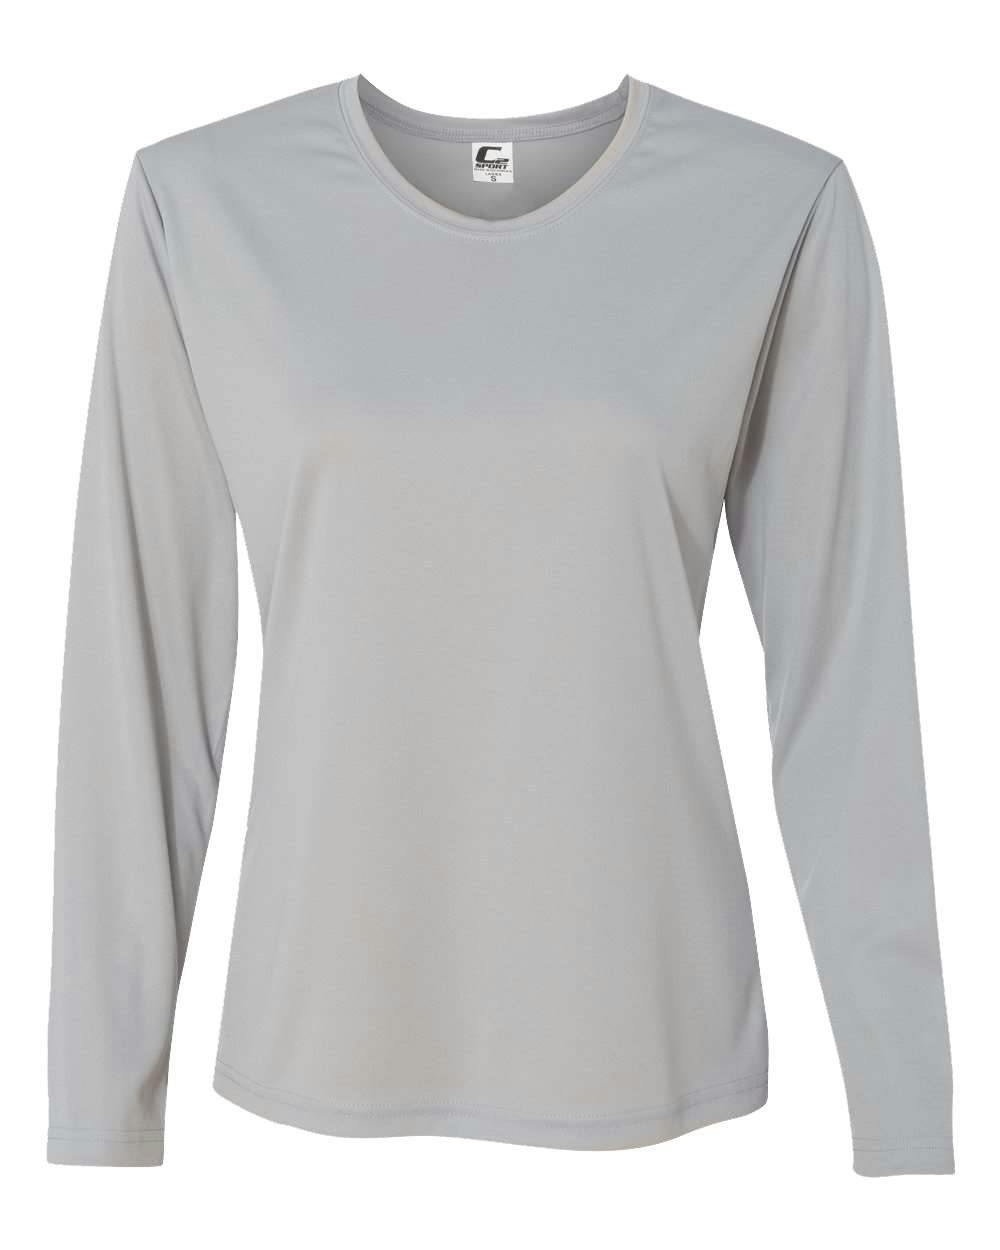 Image for Women's Performance Long Sleeve T-Shirt - 5604